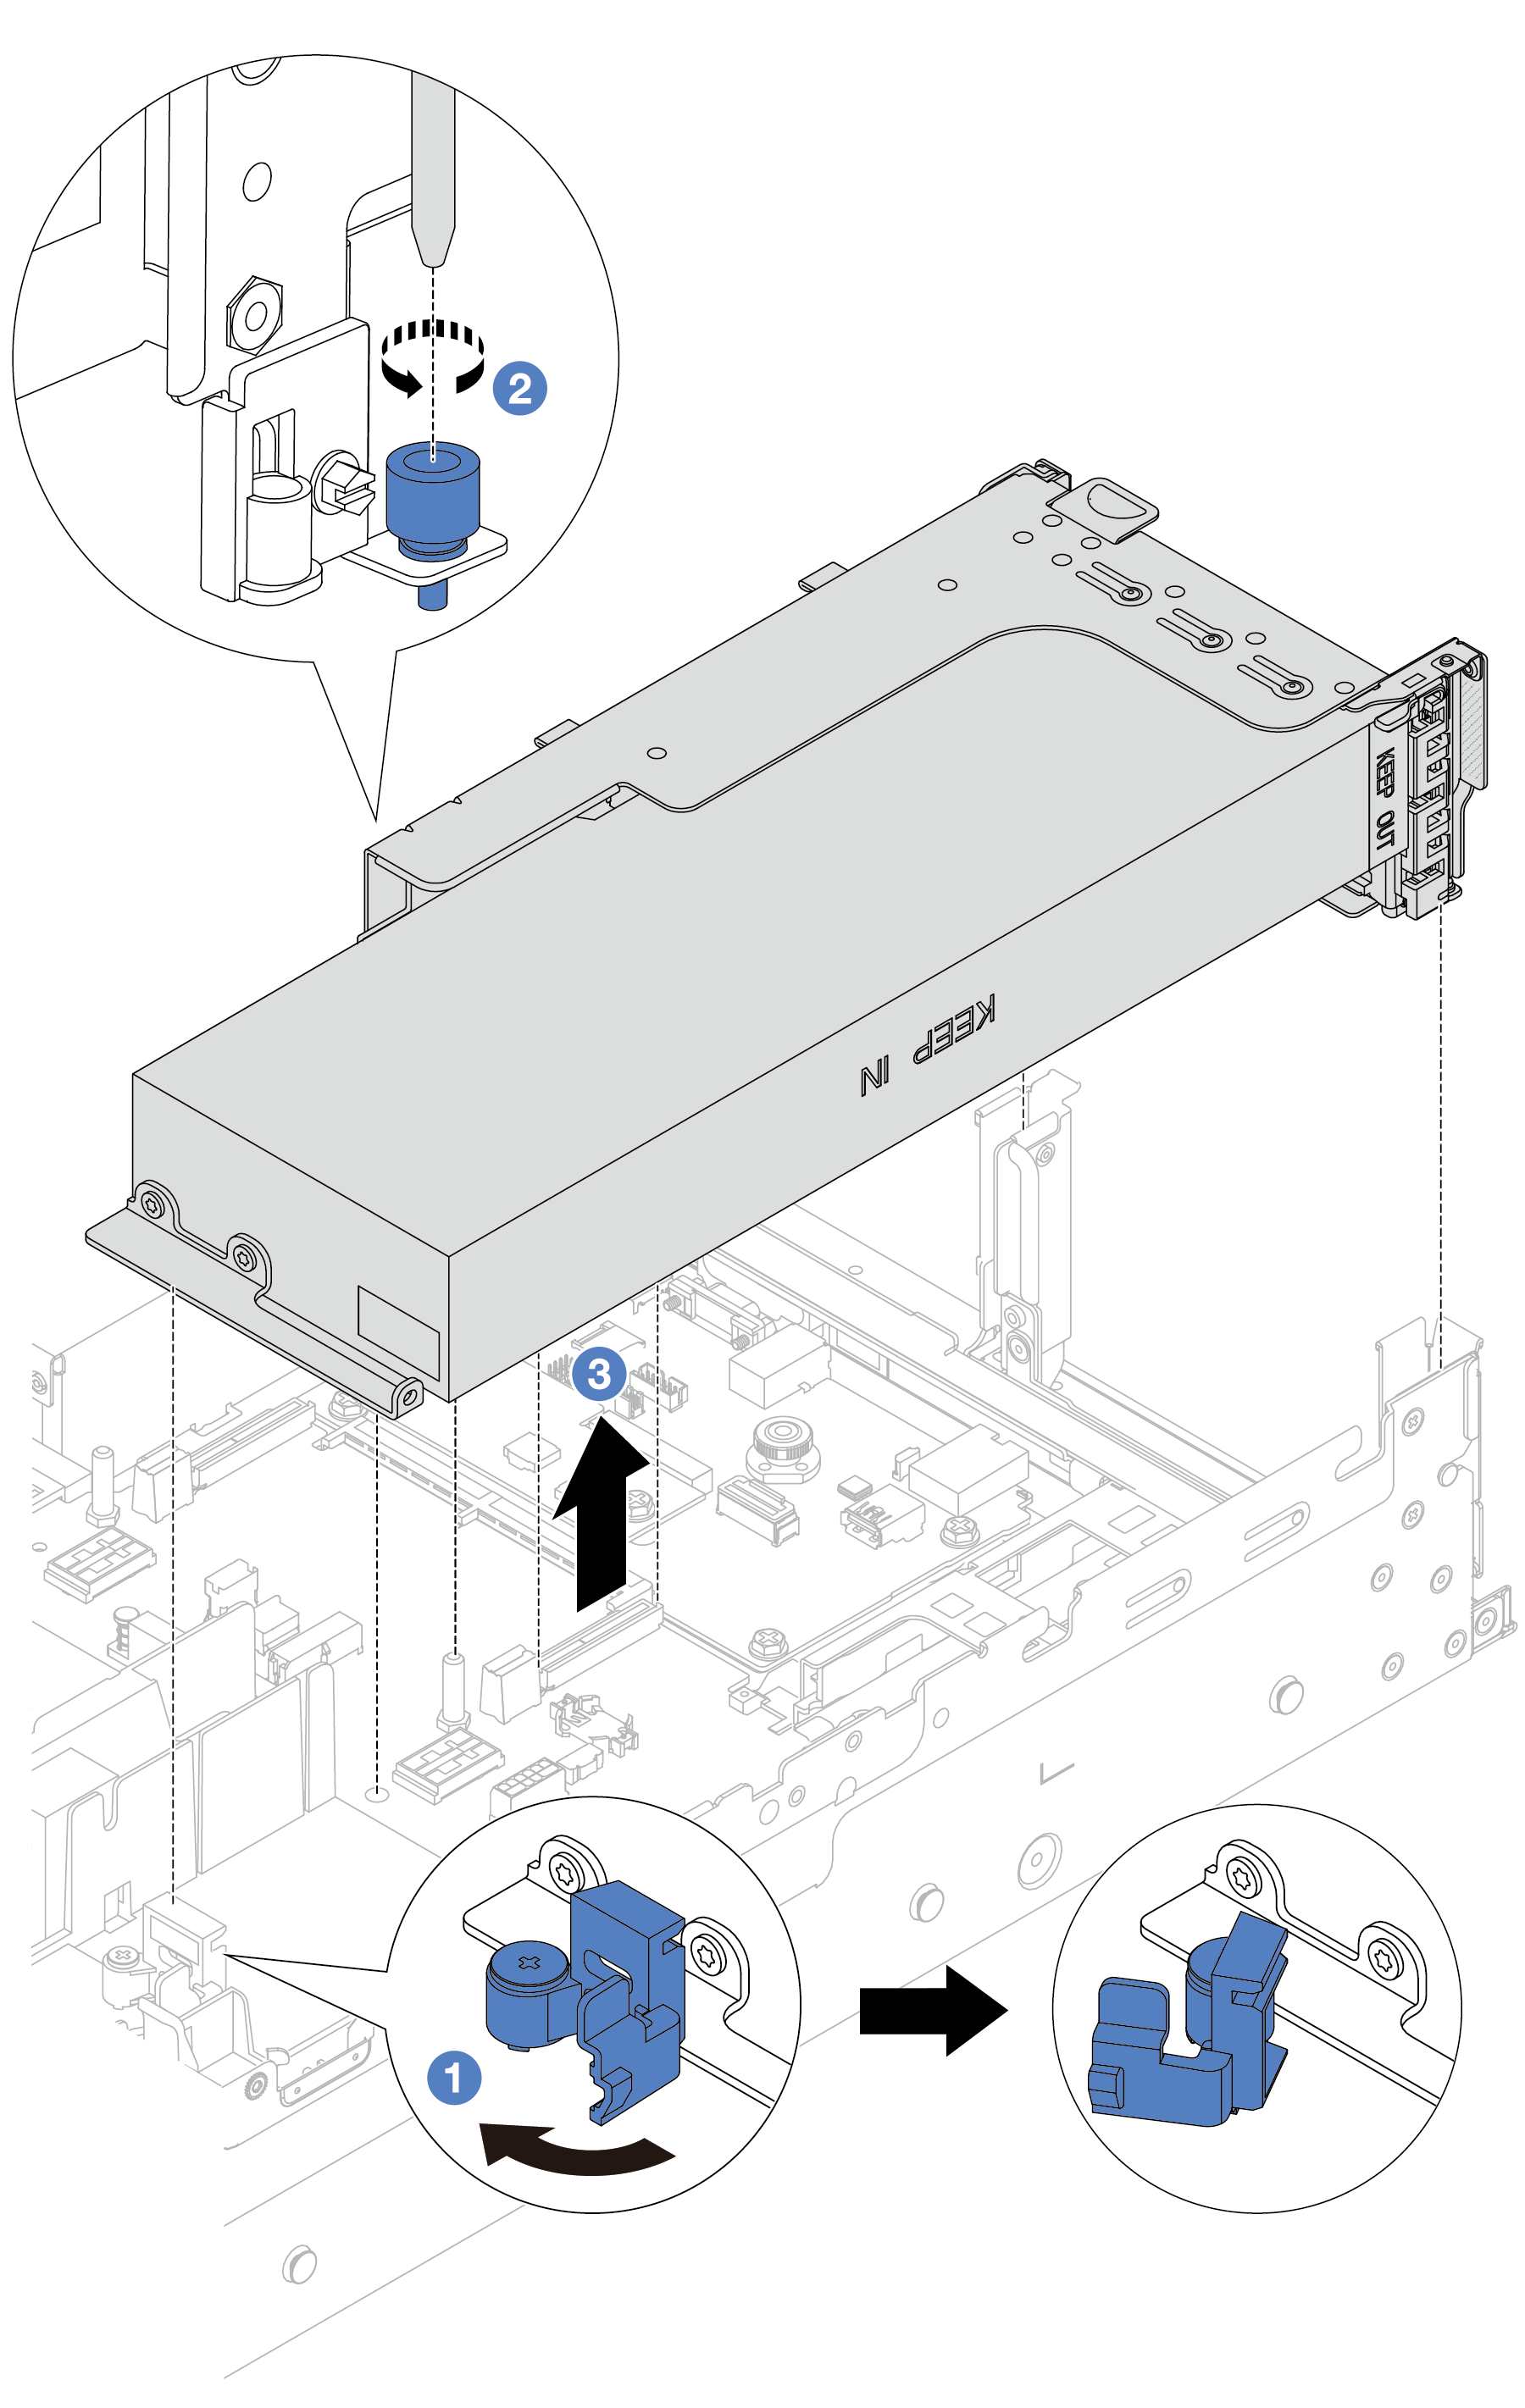 Removing the riser 1 assembly with GPU adapter